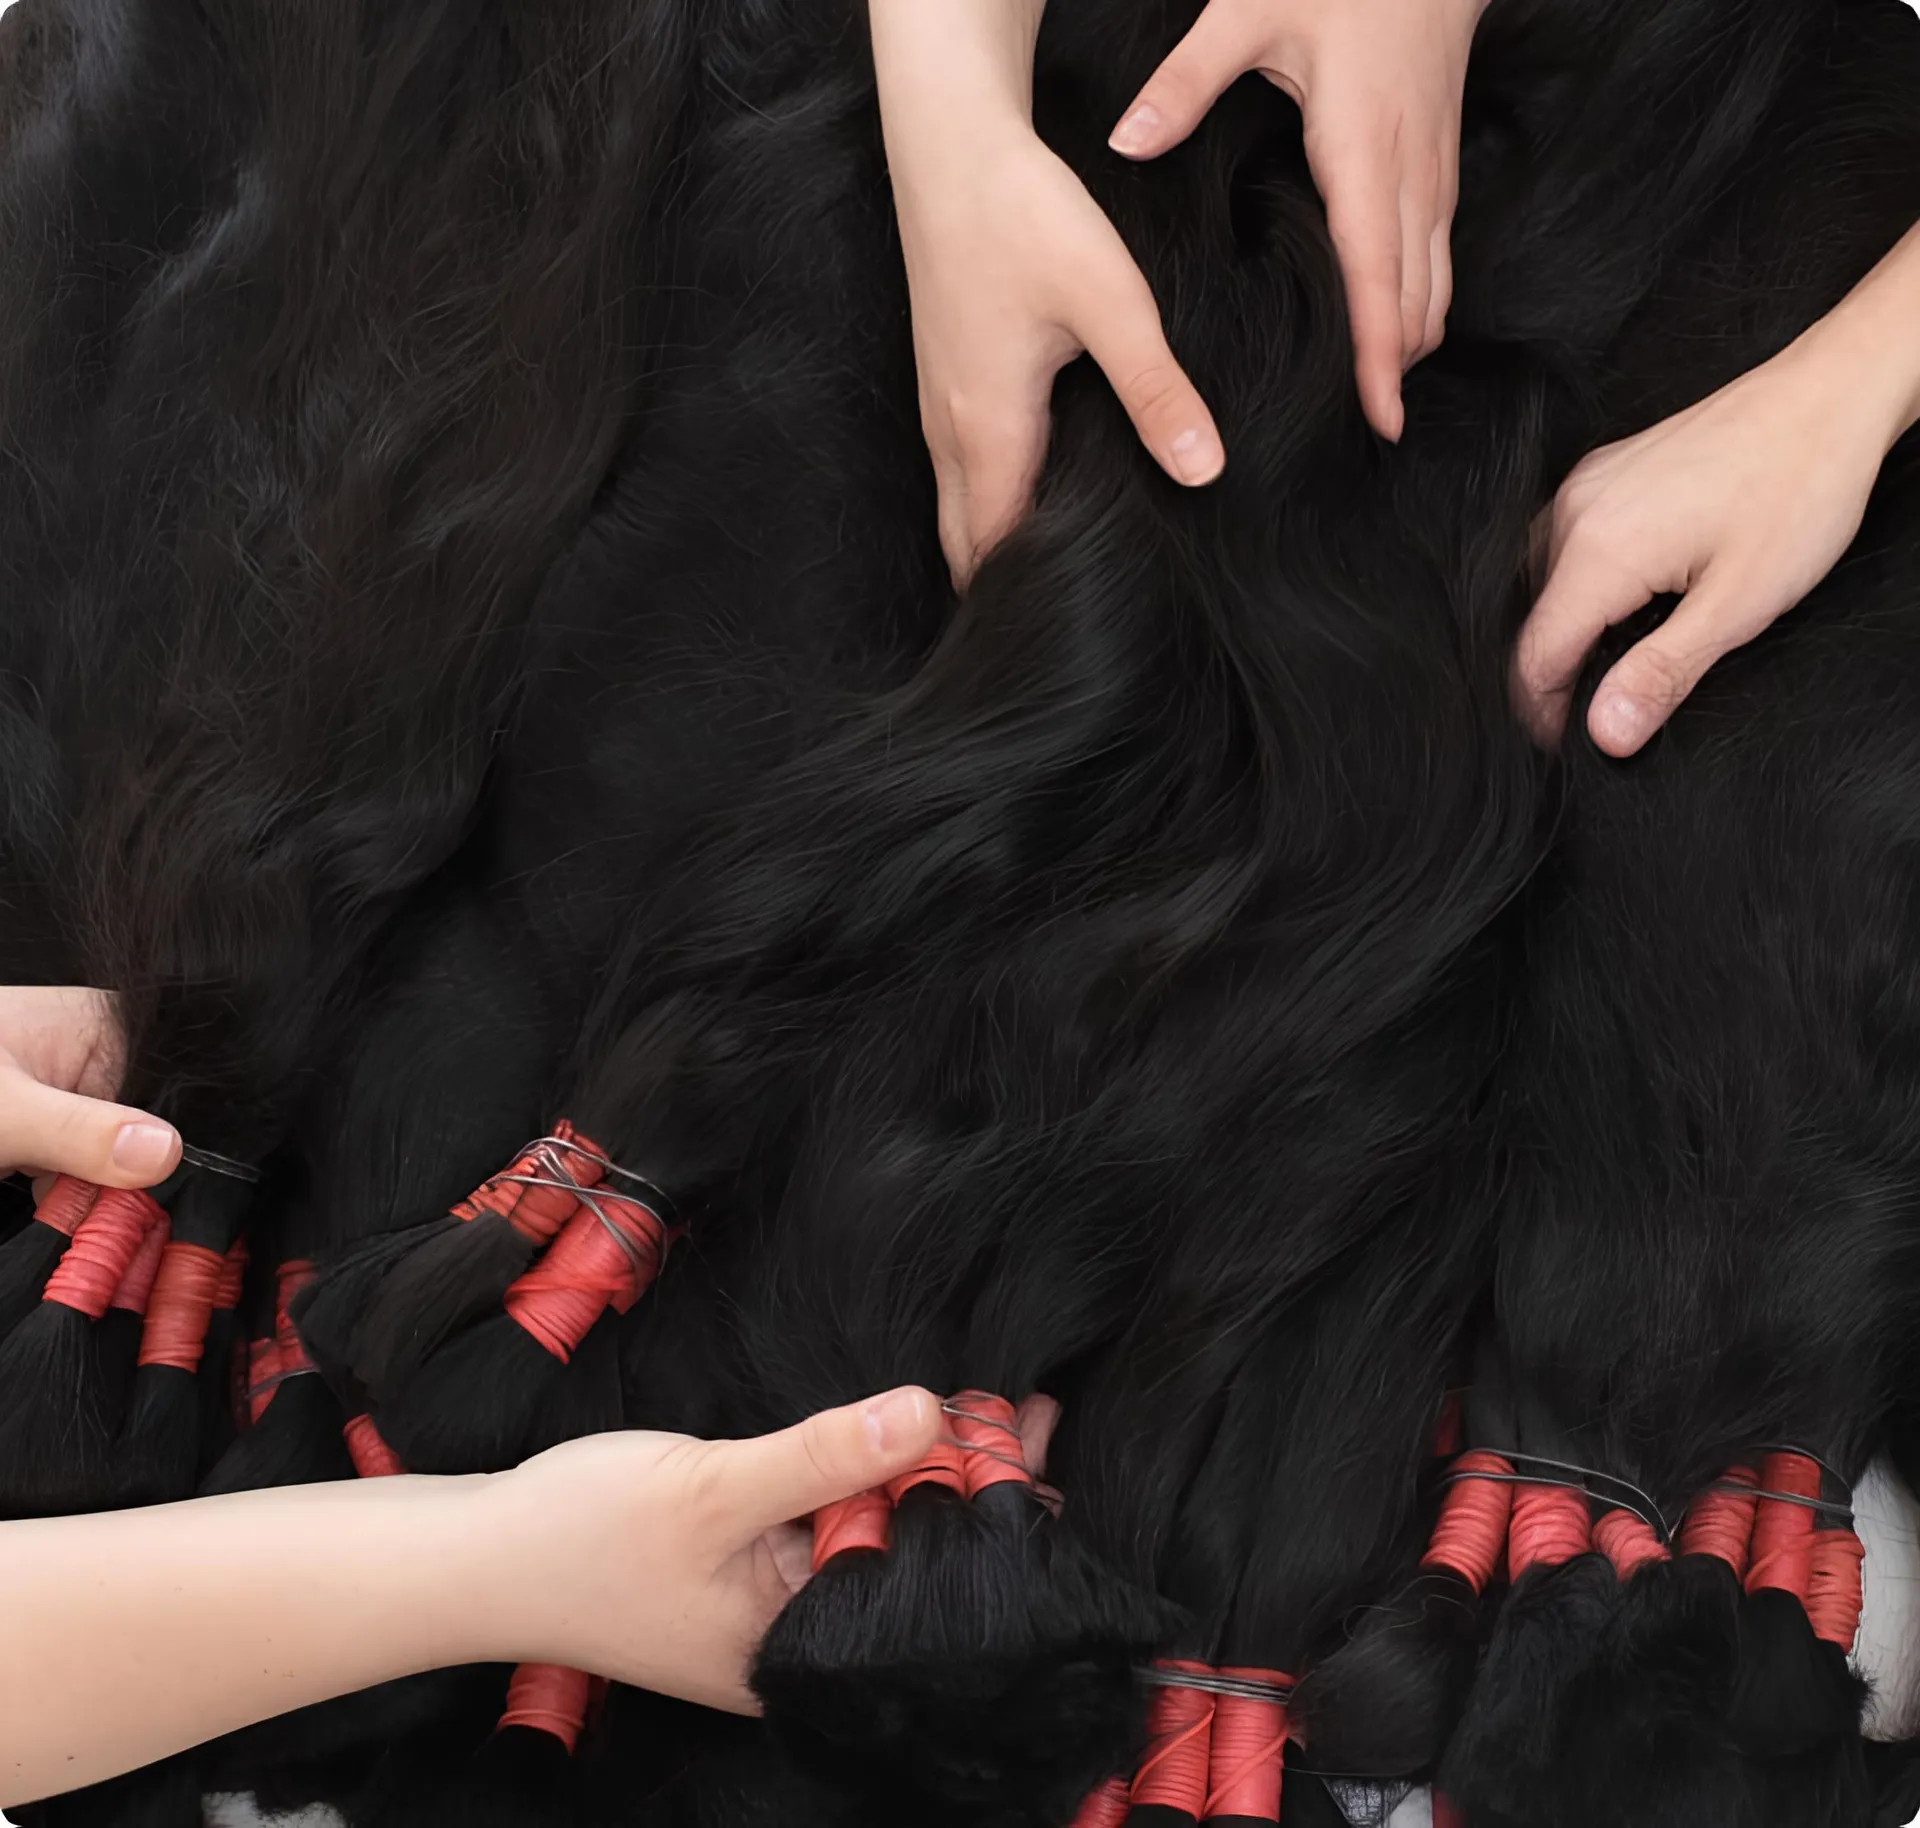 Bunches of long dark hair laid out on a table are being inspected.